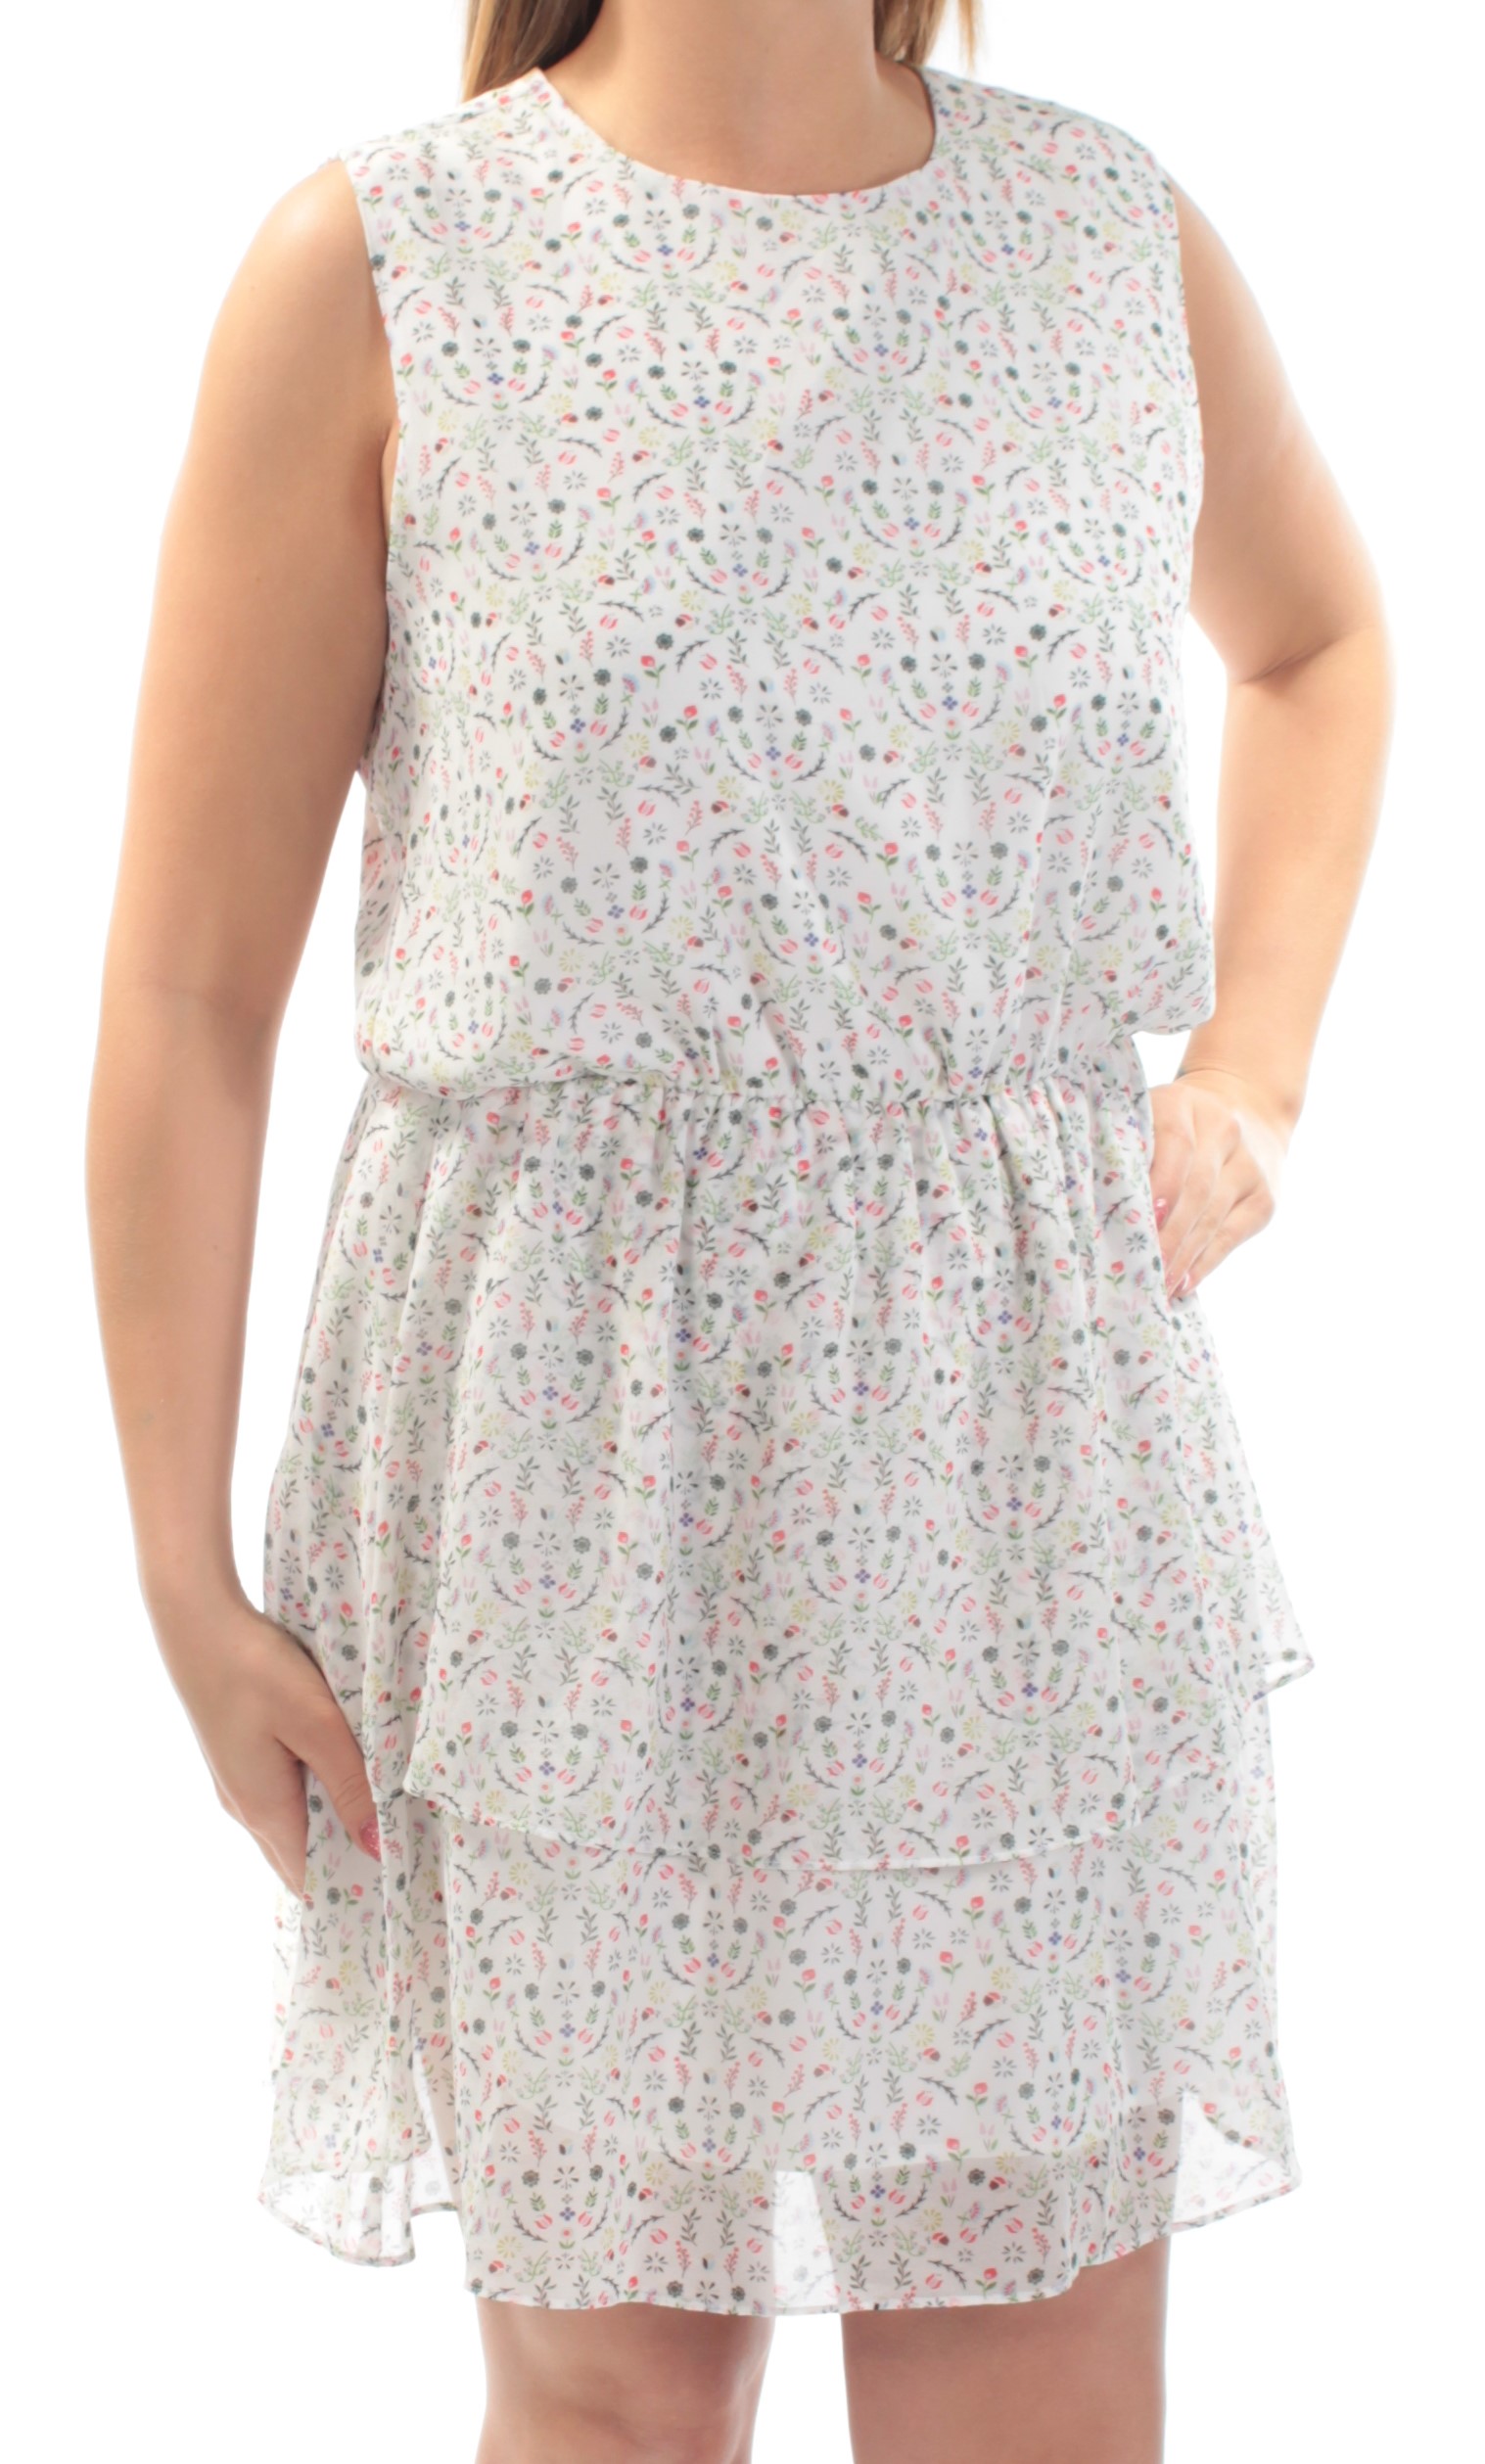 CYNTHIA ROWLEY Womens White Floral Sleeveless Jewel Neck Above The Knee Fit + Flare Dress L - image 3 of 4